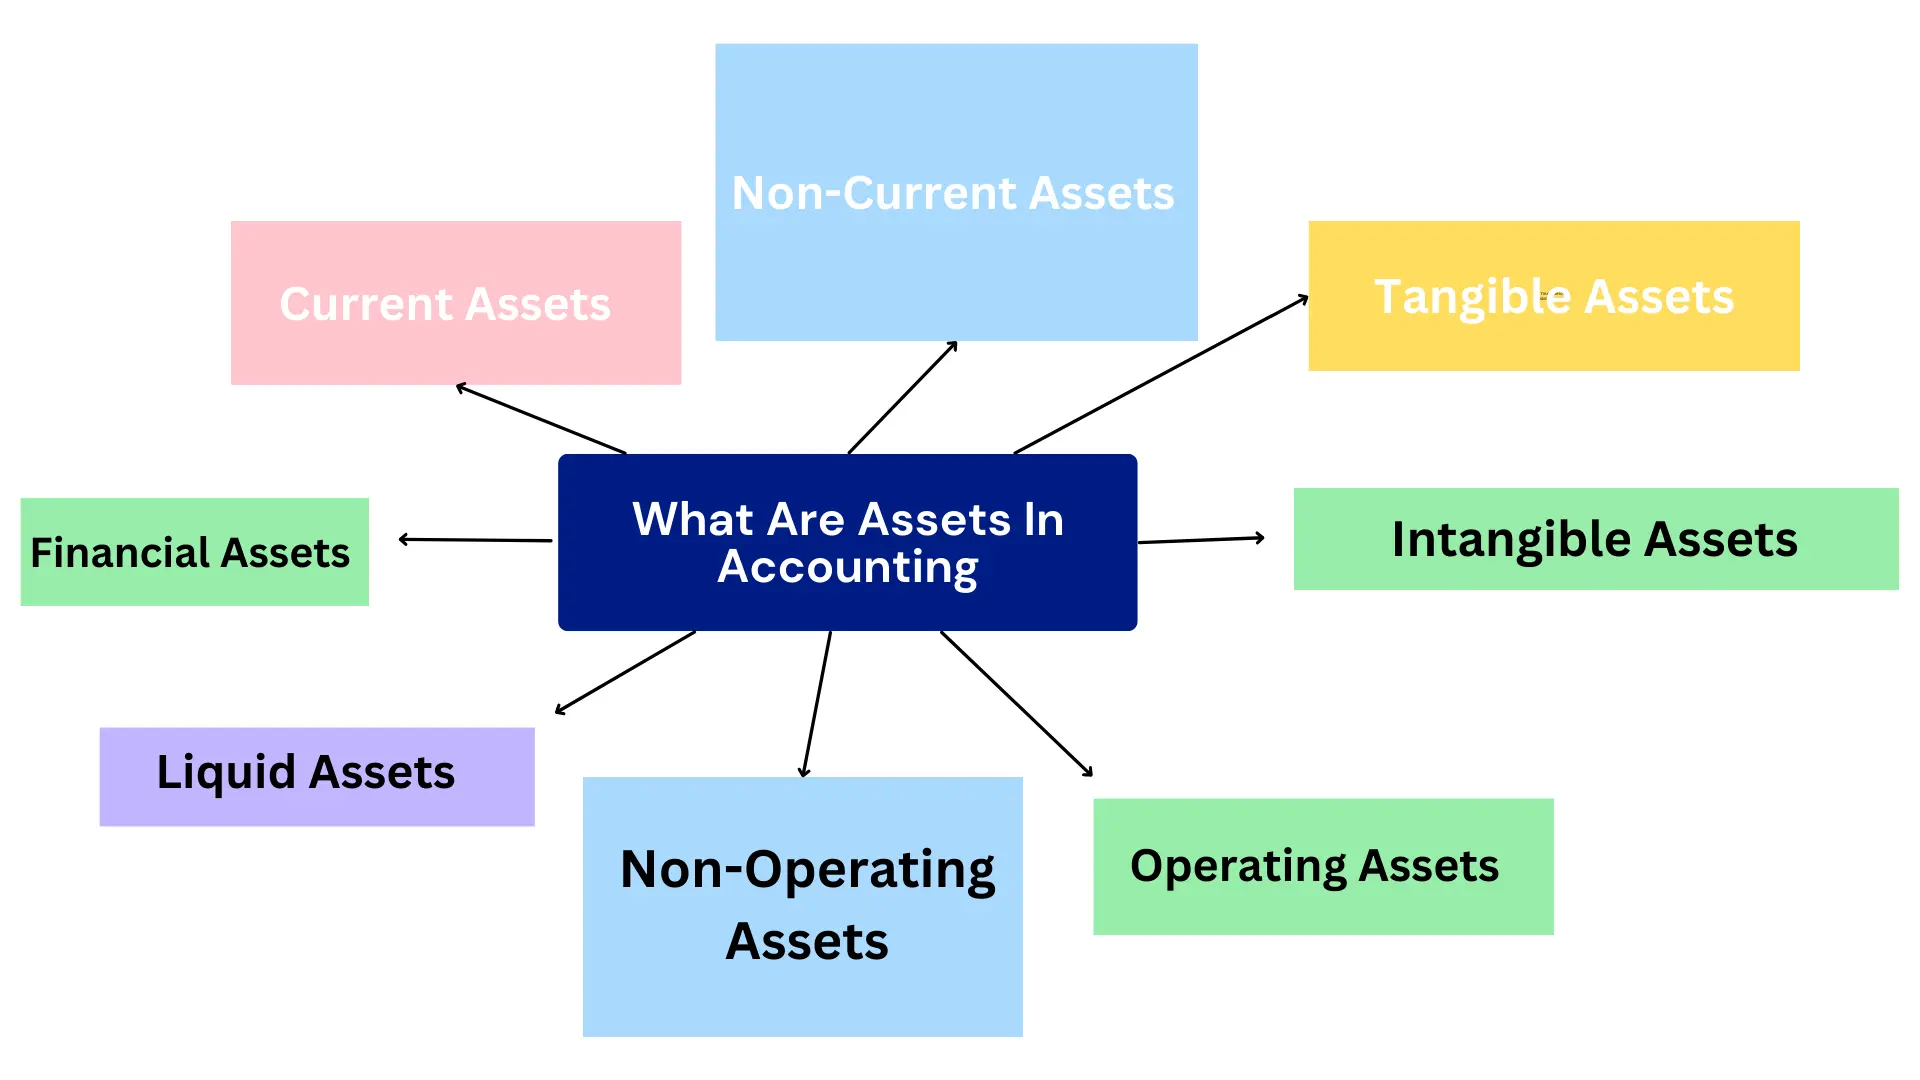 What Are Assets